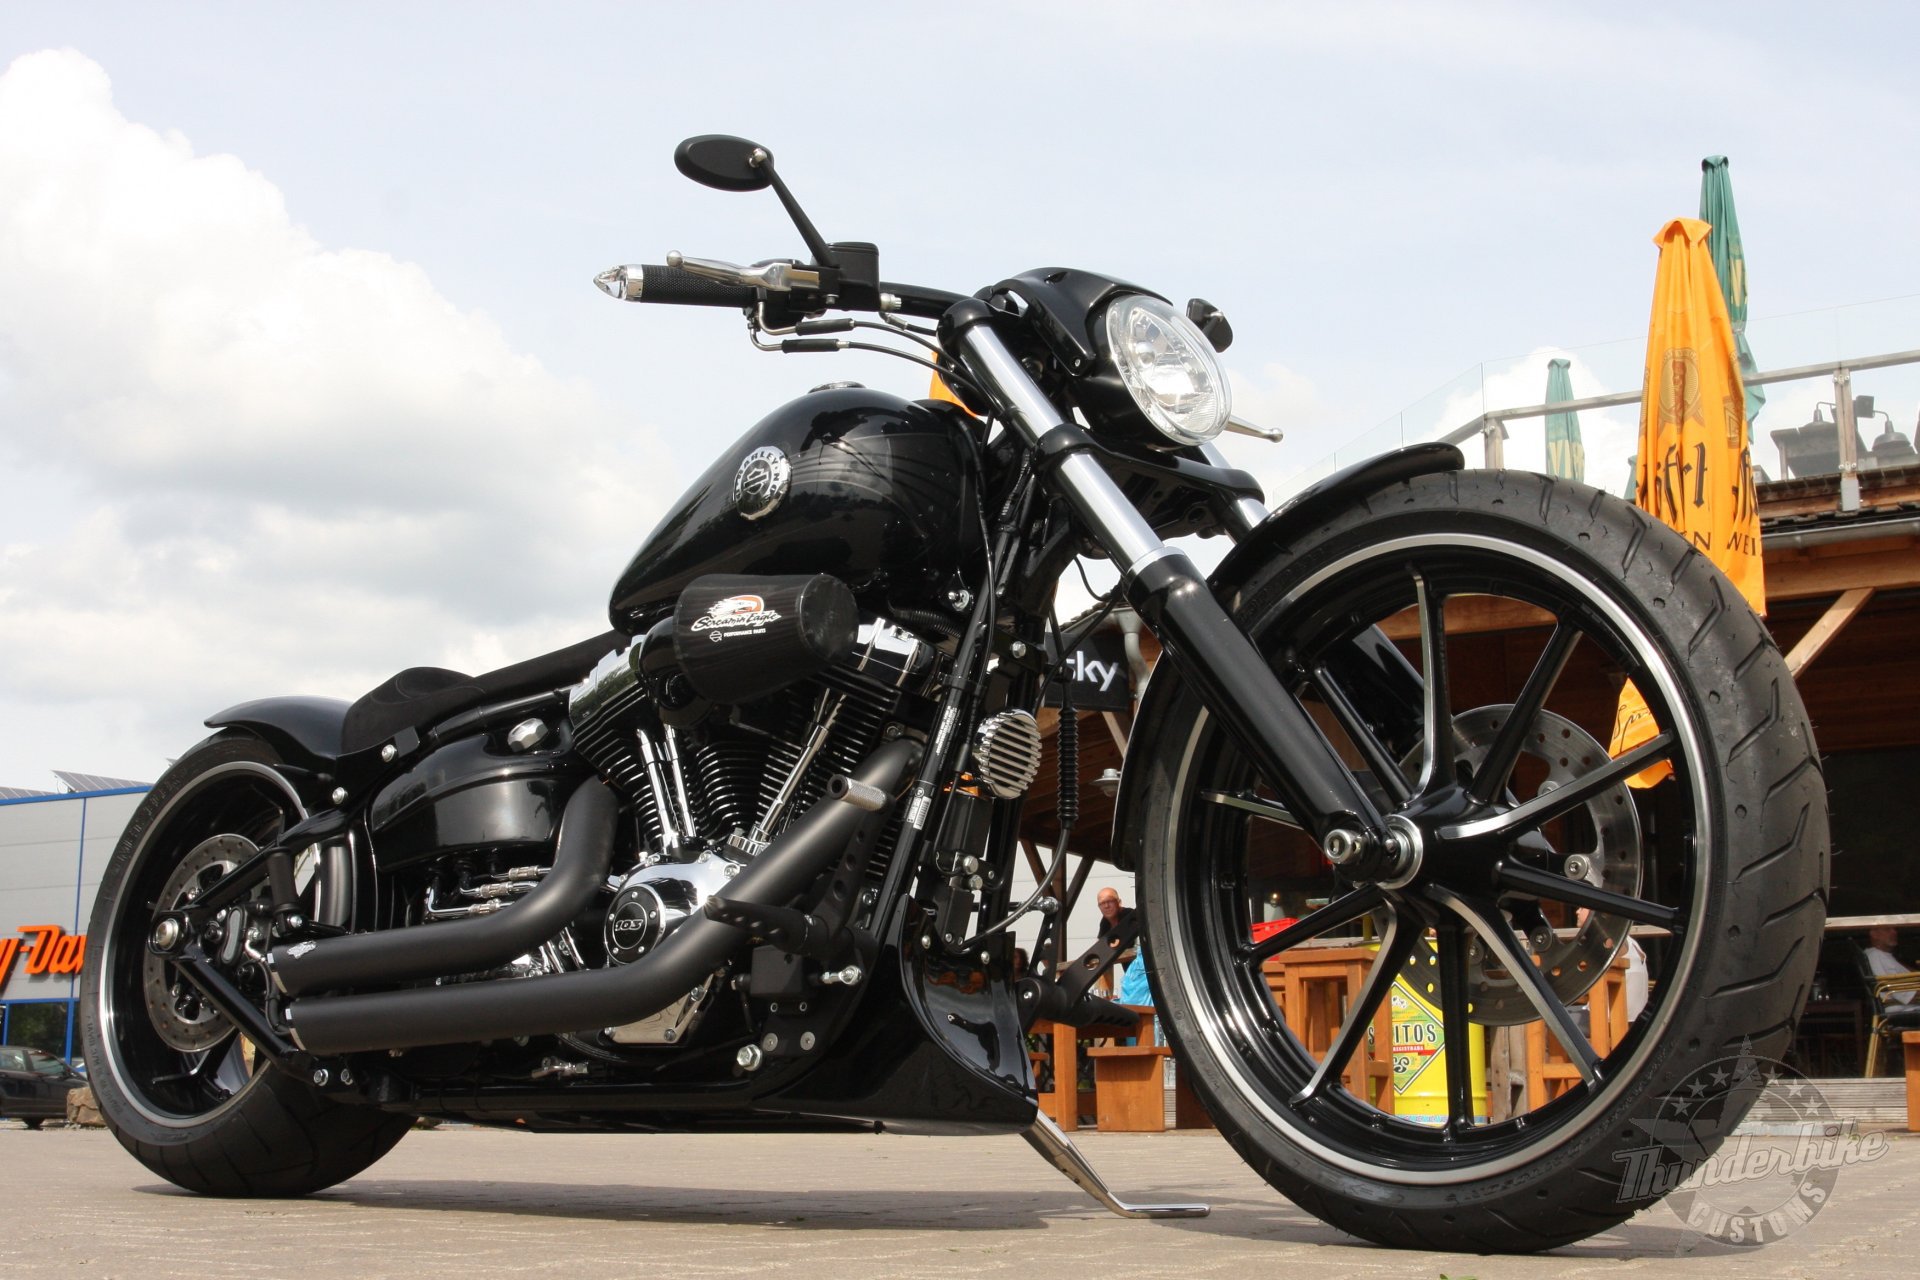 Harley Davidson Softail Breakout Wallpaper And Image